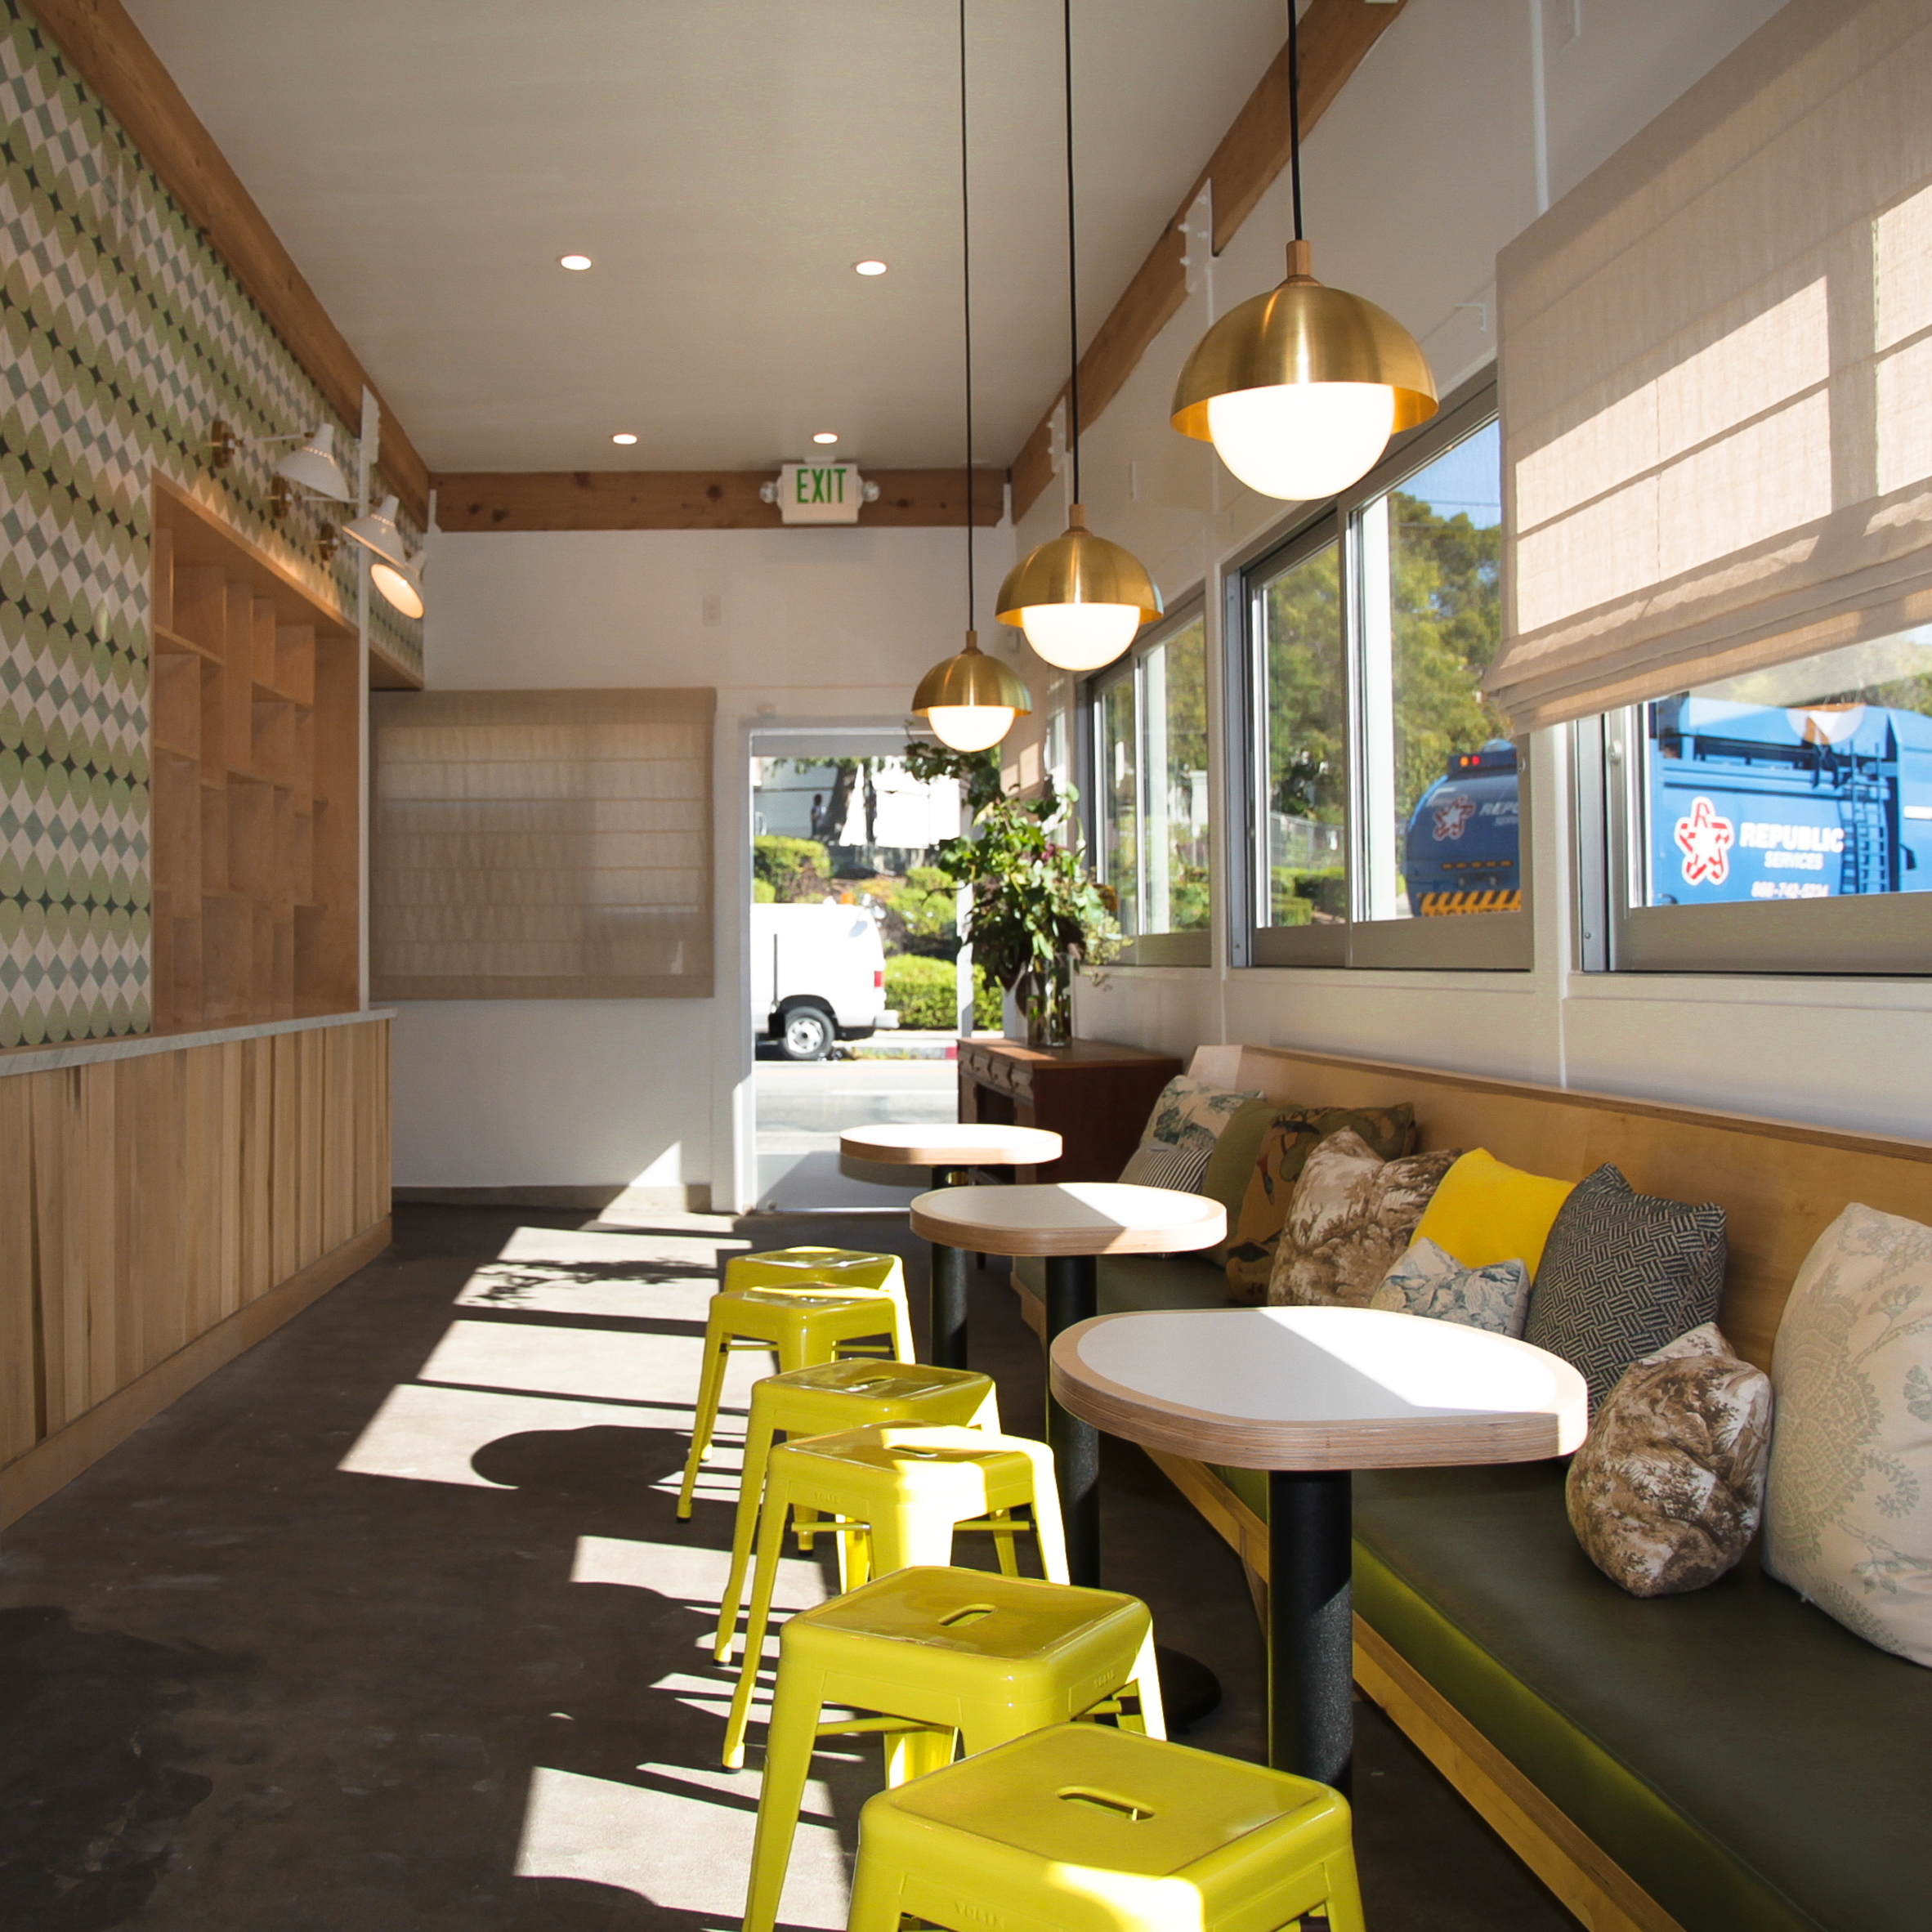 Moby's Little Pine vegan cafe features modernism-influenced interior